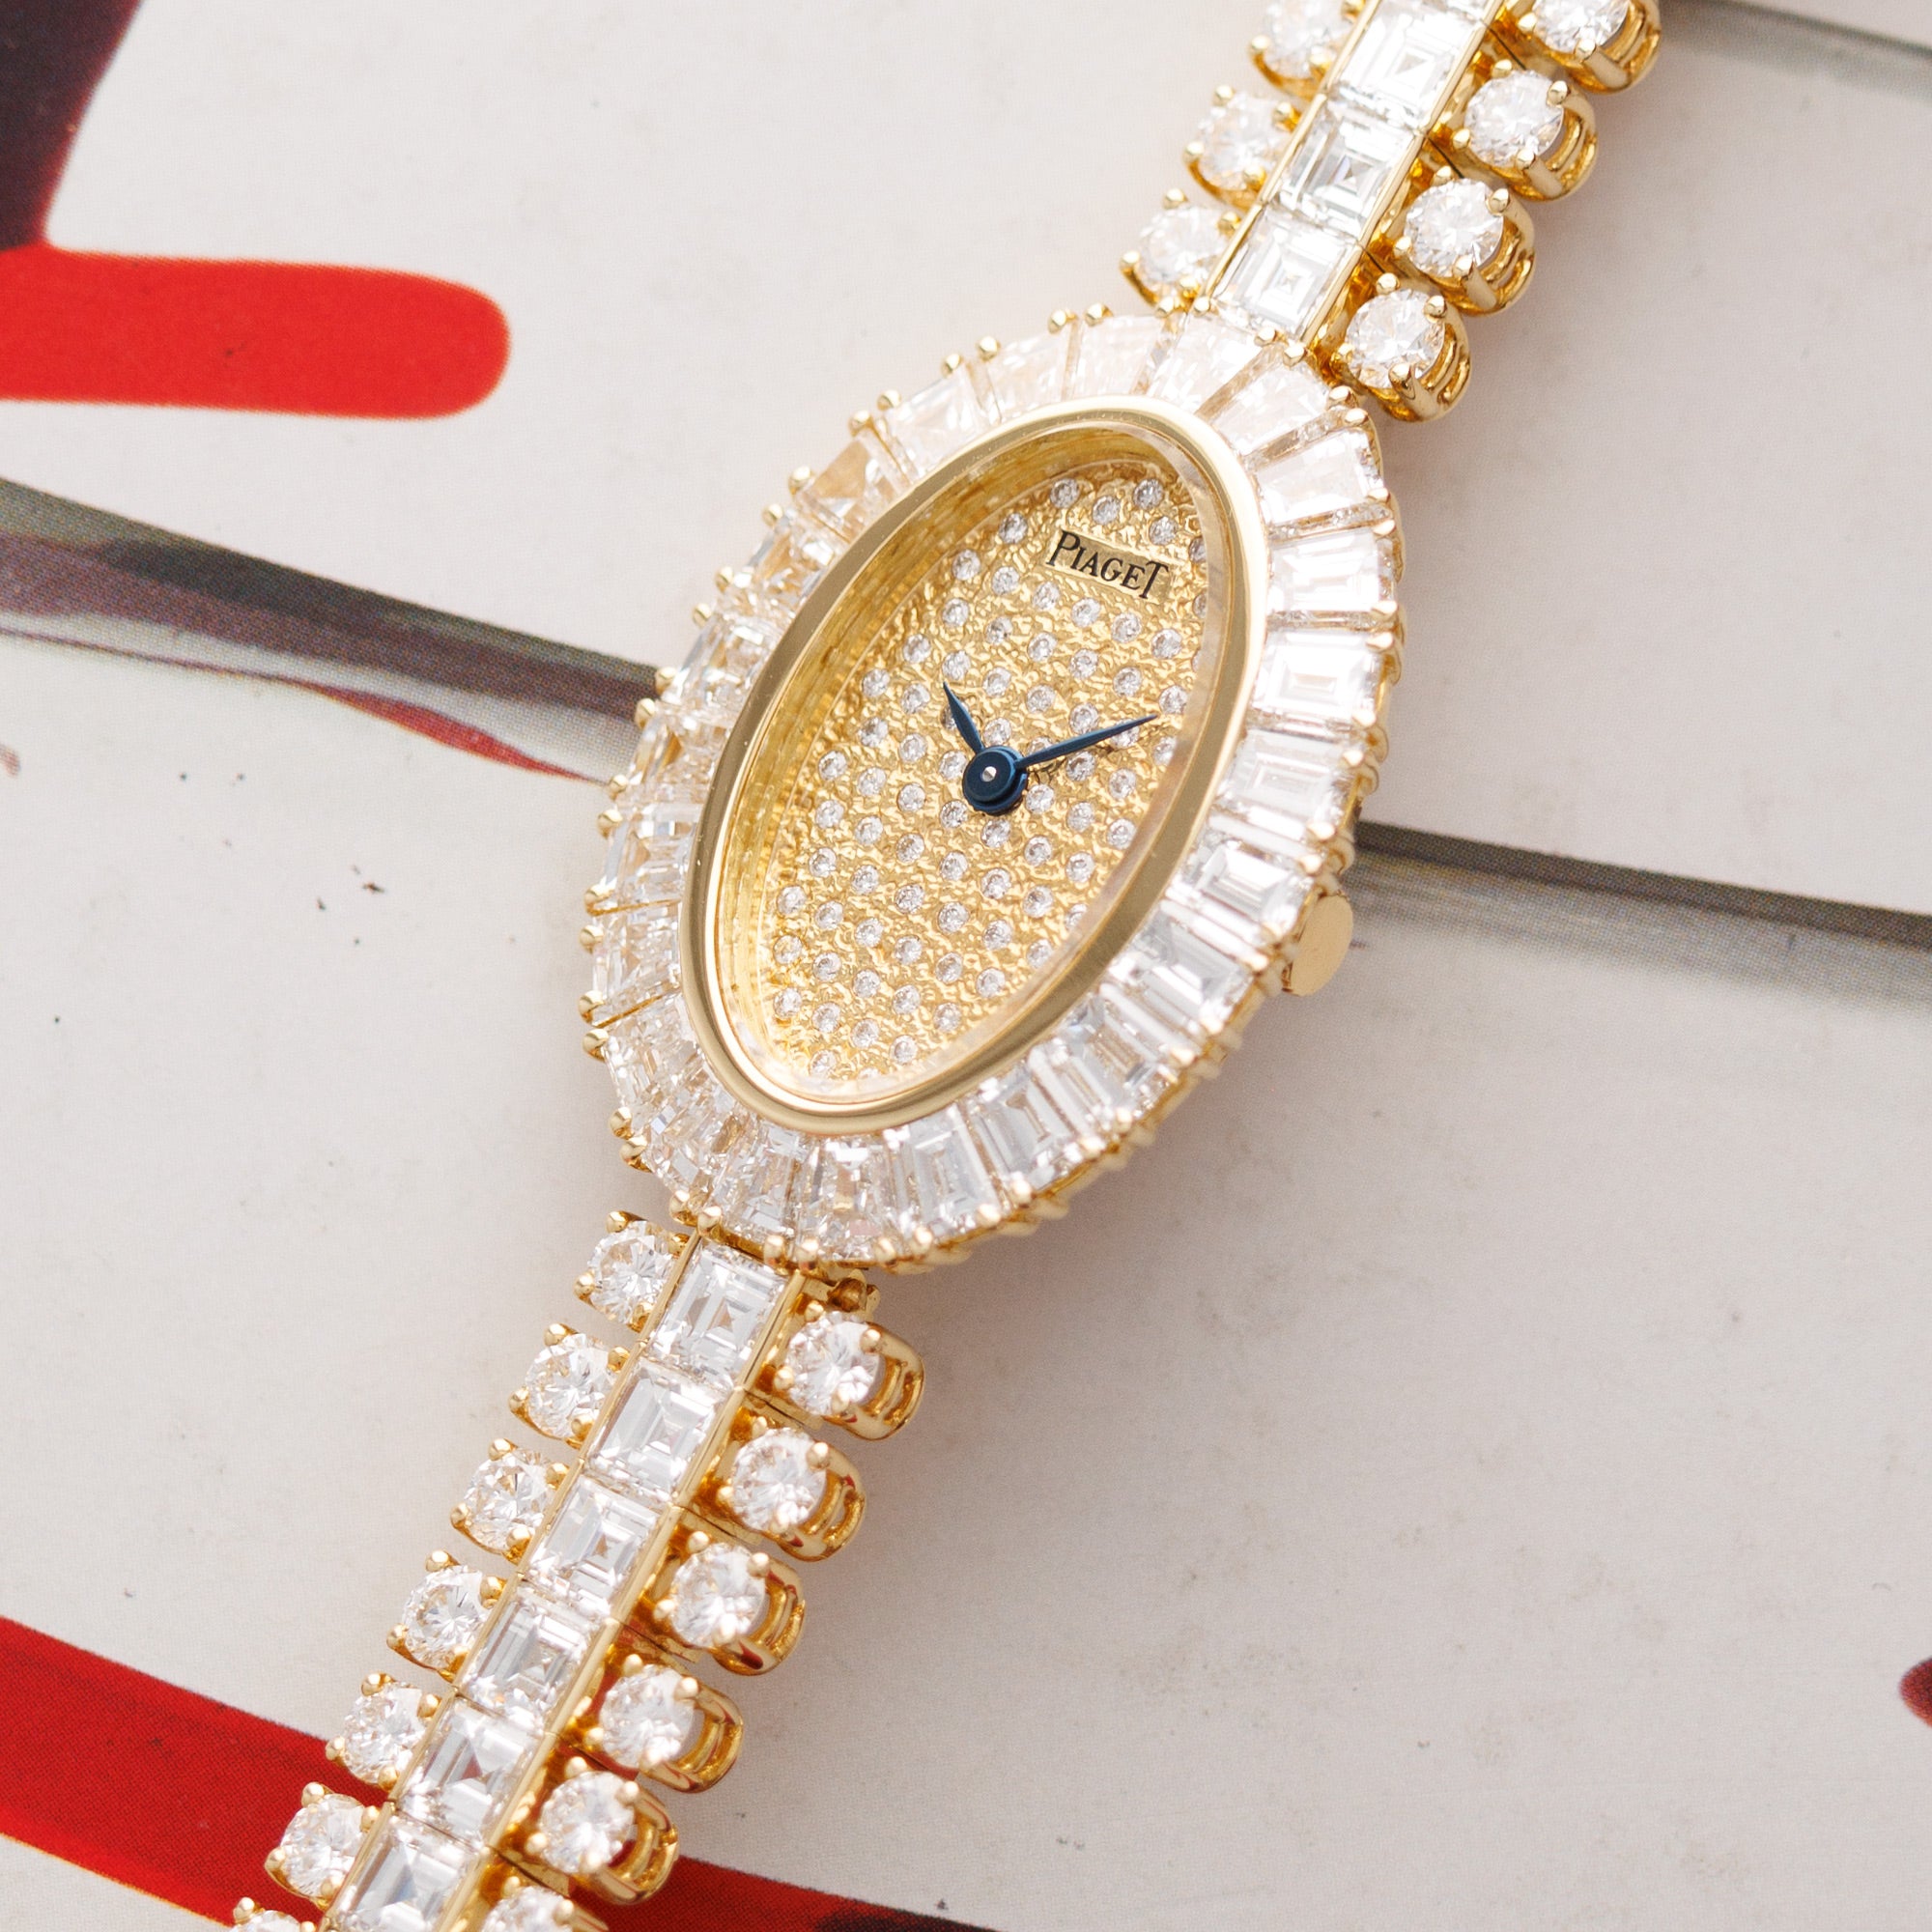 Piaget - Piaget Yellow Gold Baguette Bezel with Pave Dial and Diamonds Bracelet - The Keystone Watches